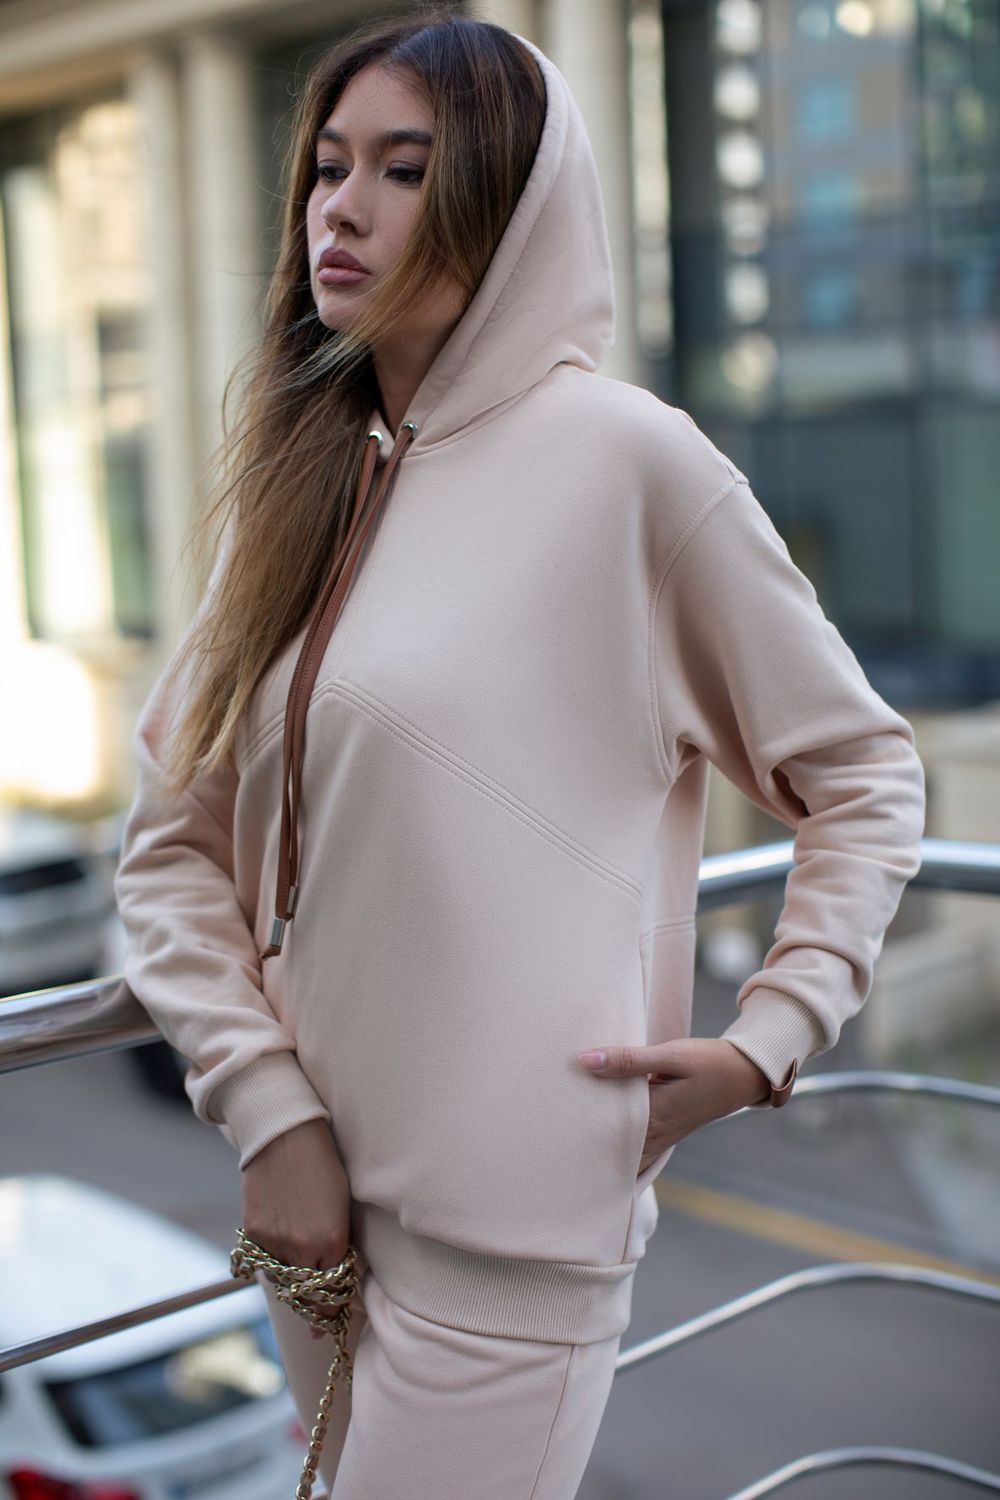 Beige sports suit with a hood